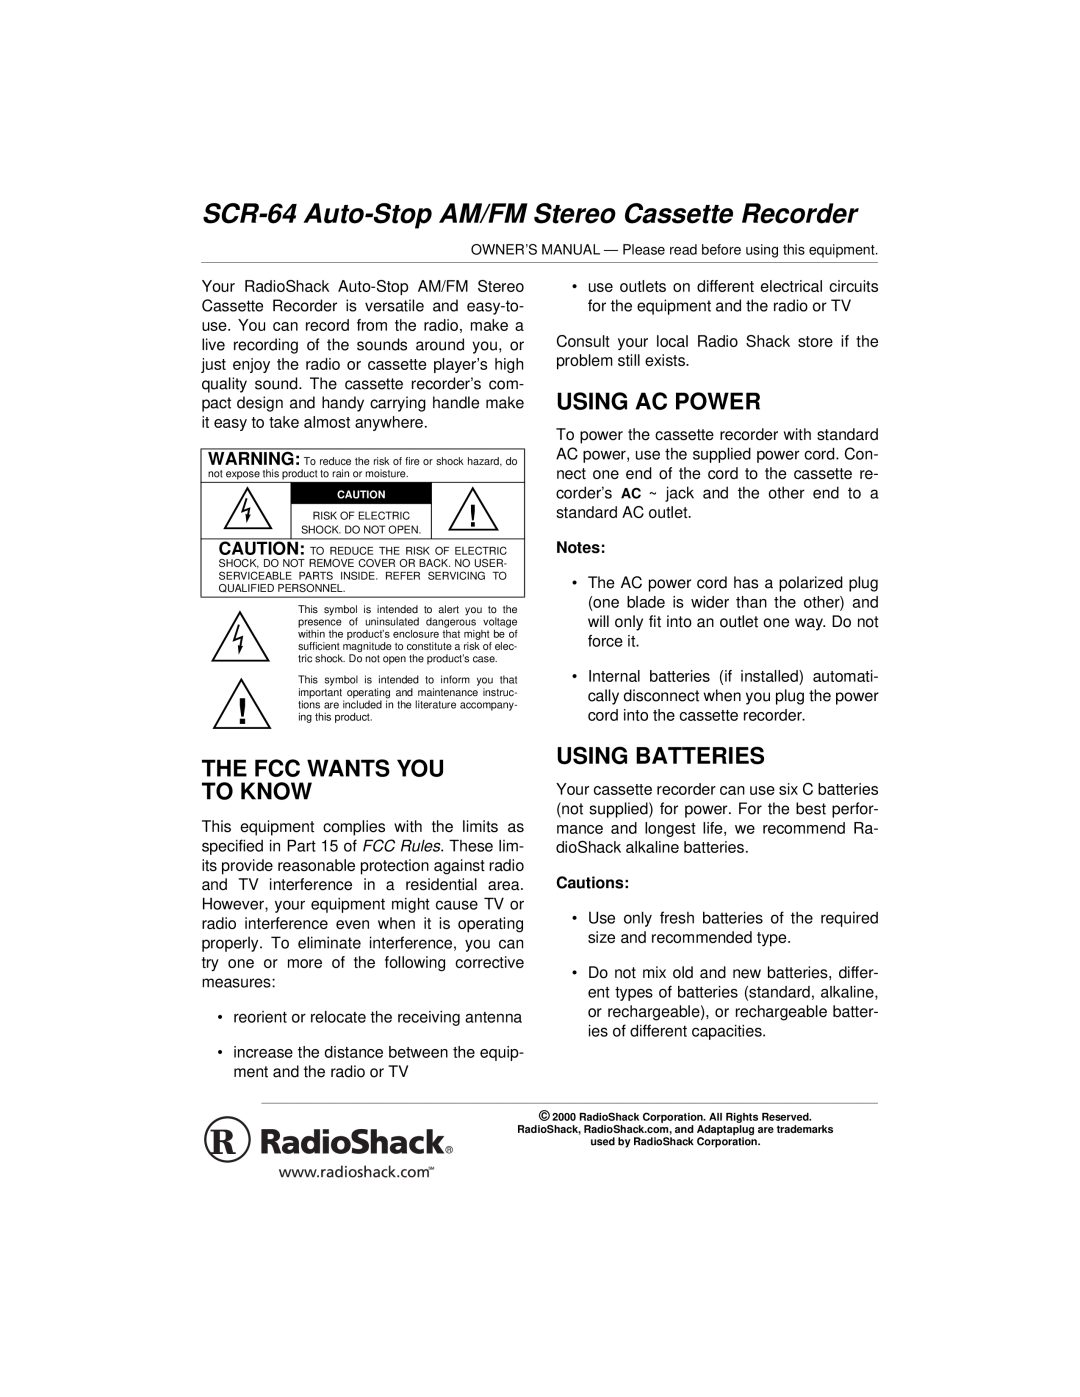 Radio Shack SCR-64 specifications The Fcc Wants You To Know, Using Ac Power, Using Batteries, Cautions 